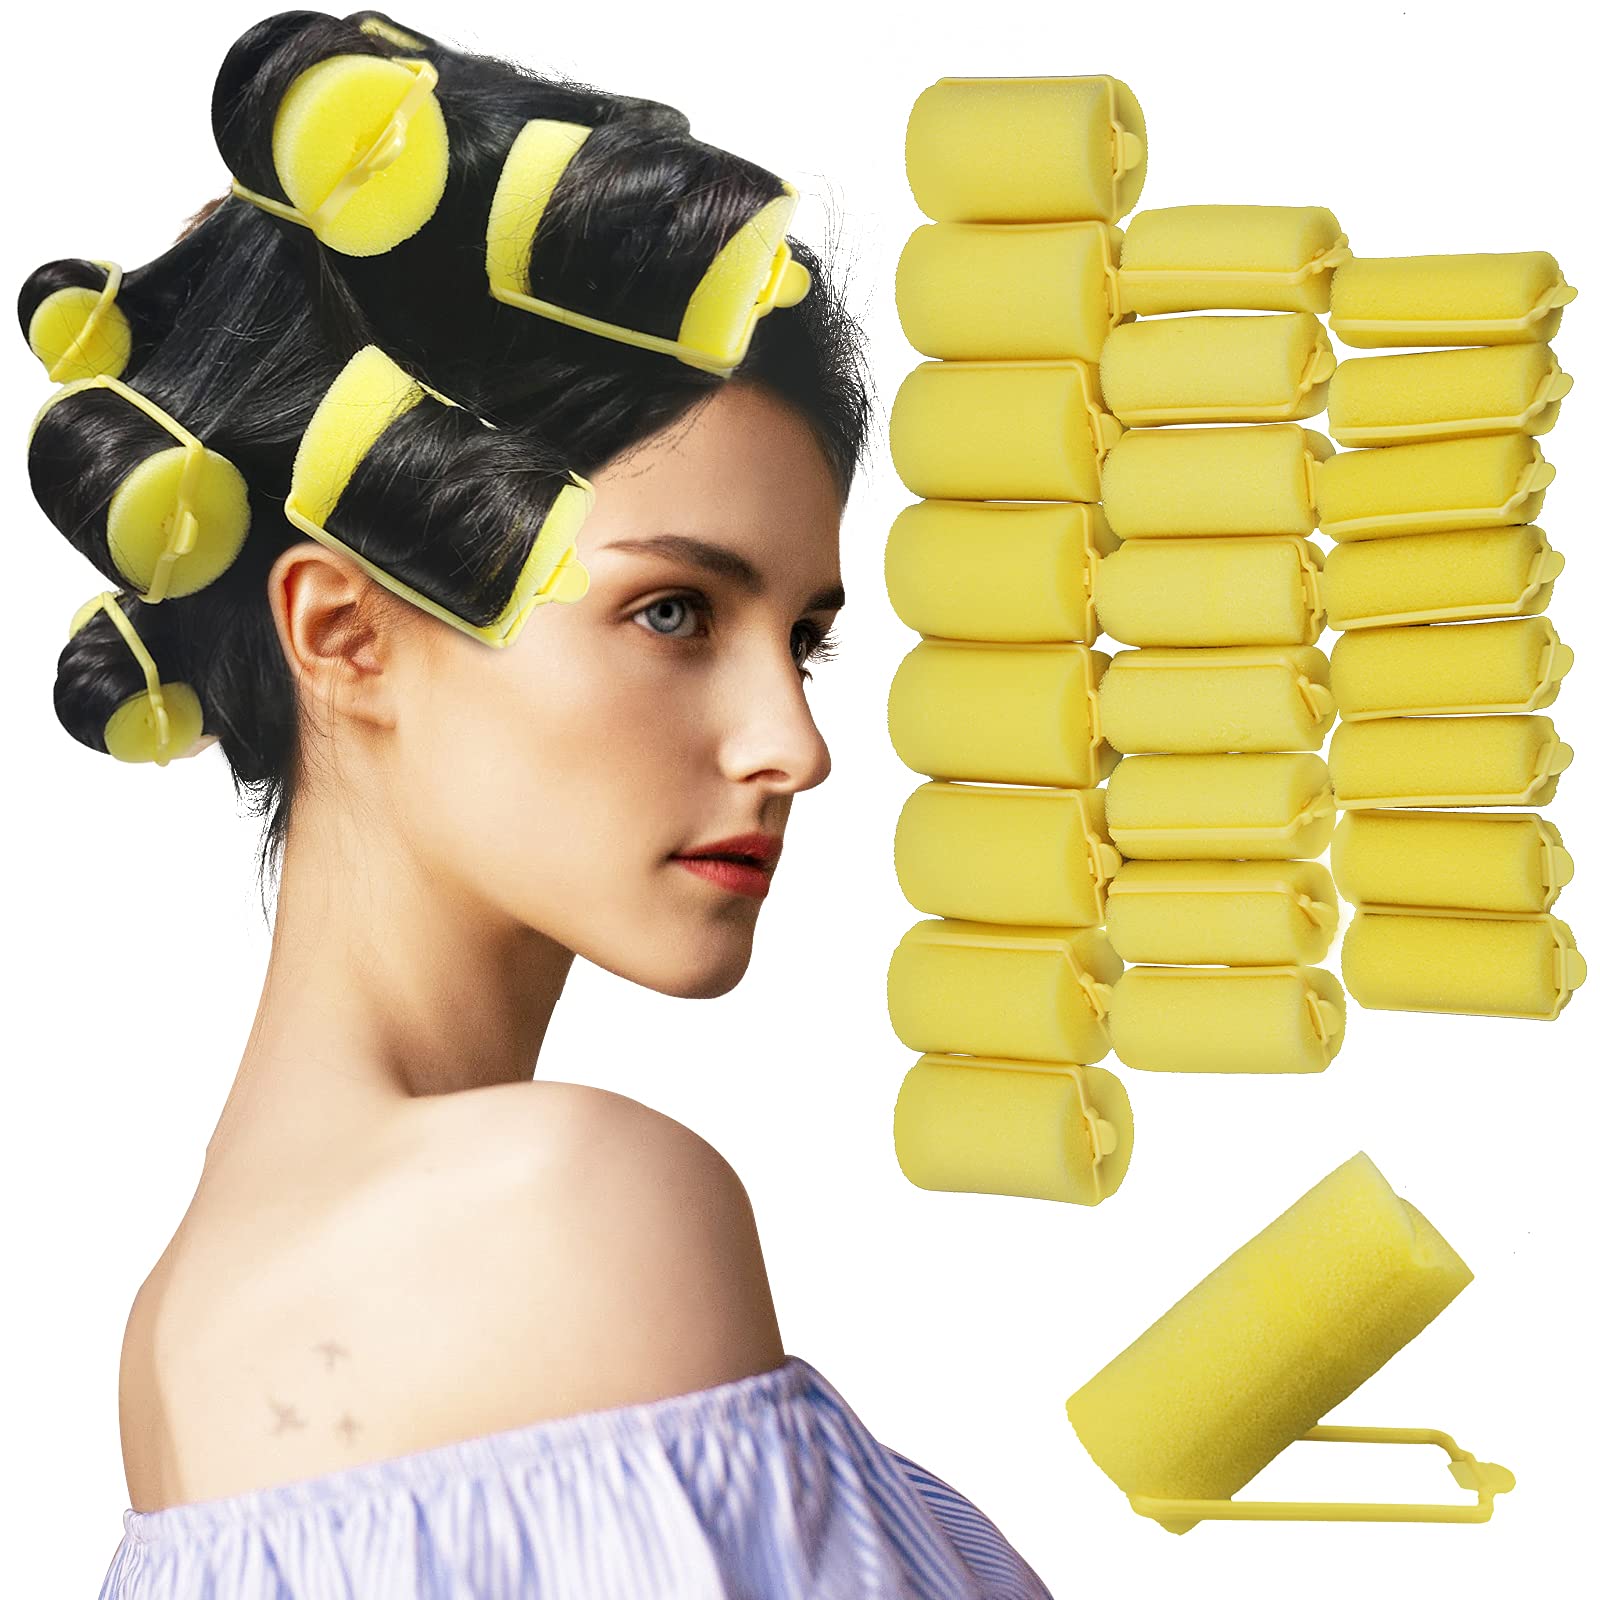 Hair Rollers,24 Pieces Foam Sponge Rollers for Hair,Soft Sleeping Hair  Curlers for Hairdressing Styling(